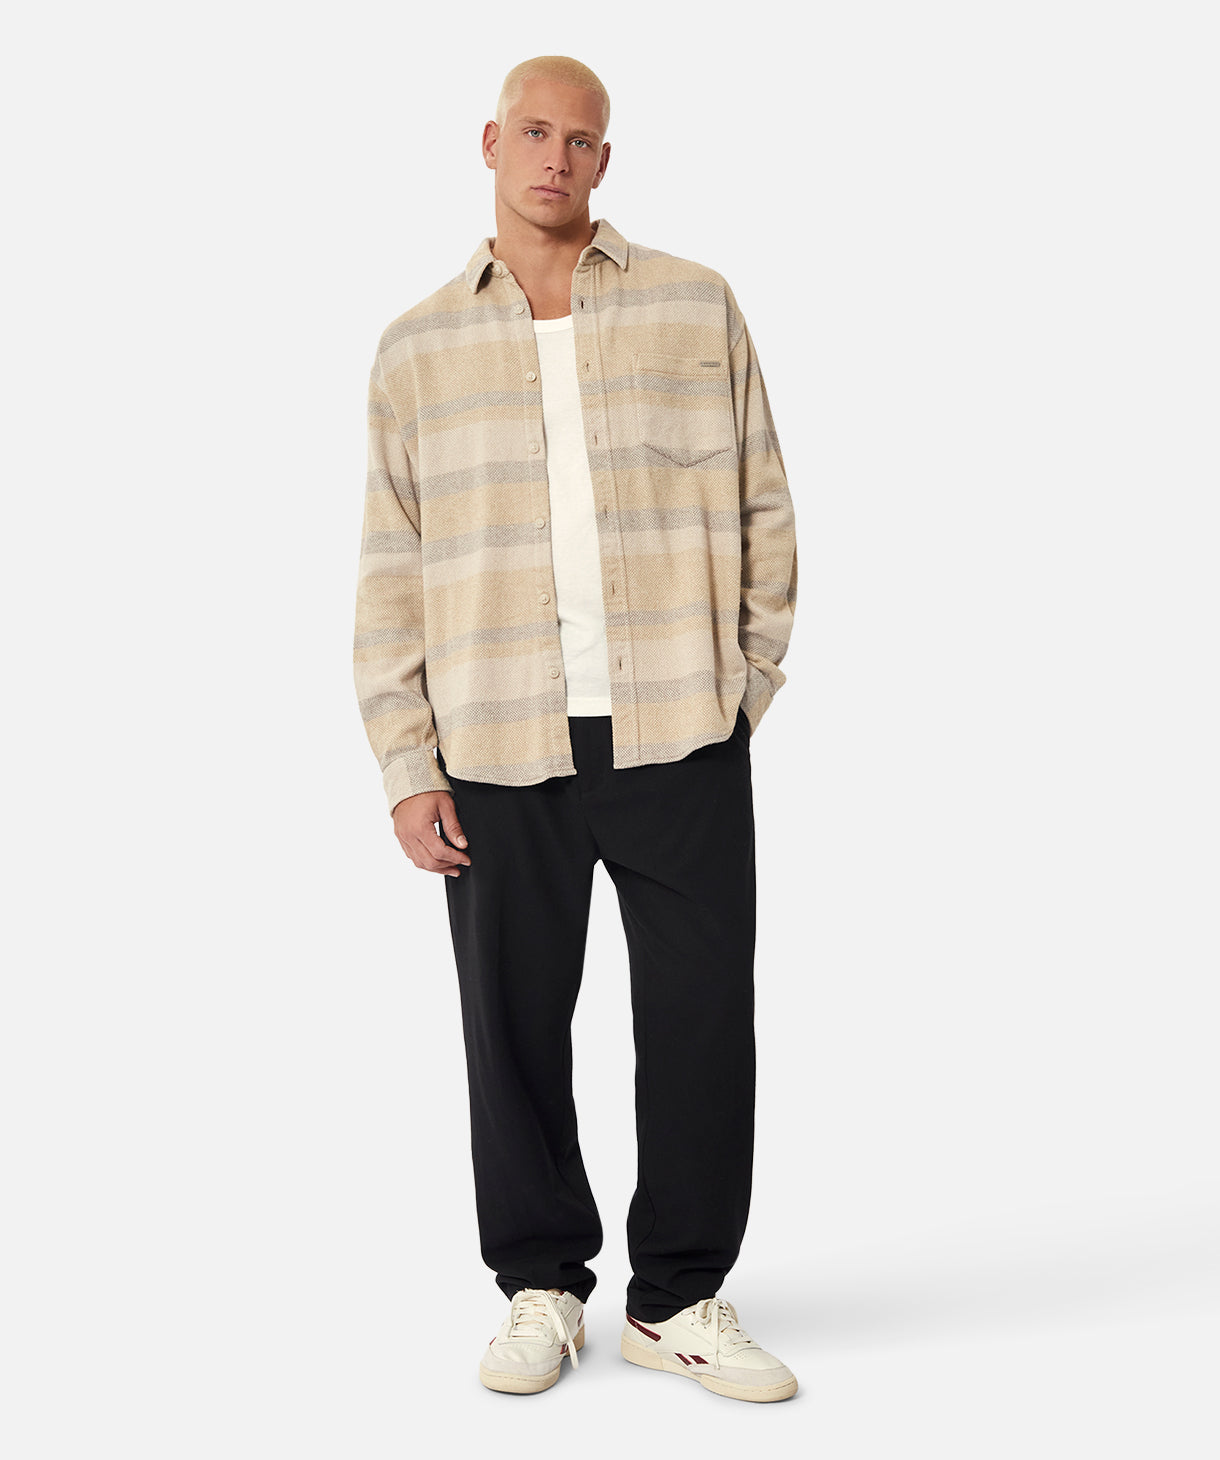 Shop The Branson Ls Shirt in Tan Combo | Industrie Clothing – Industrie ...